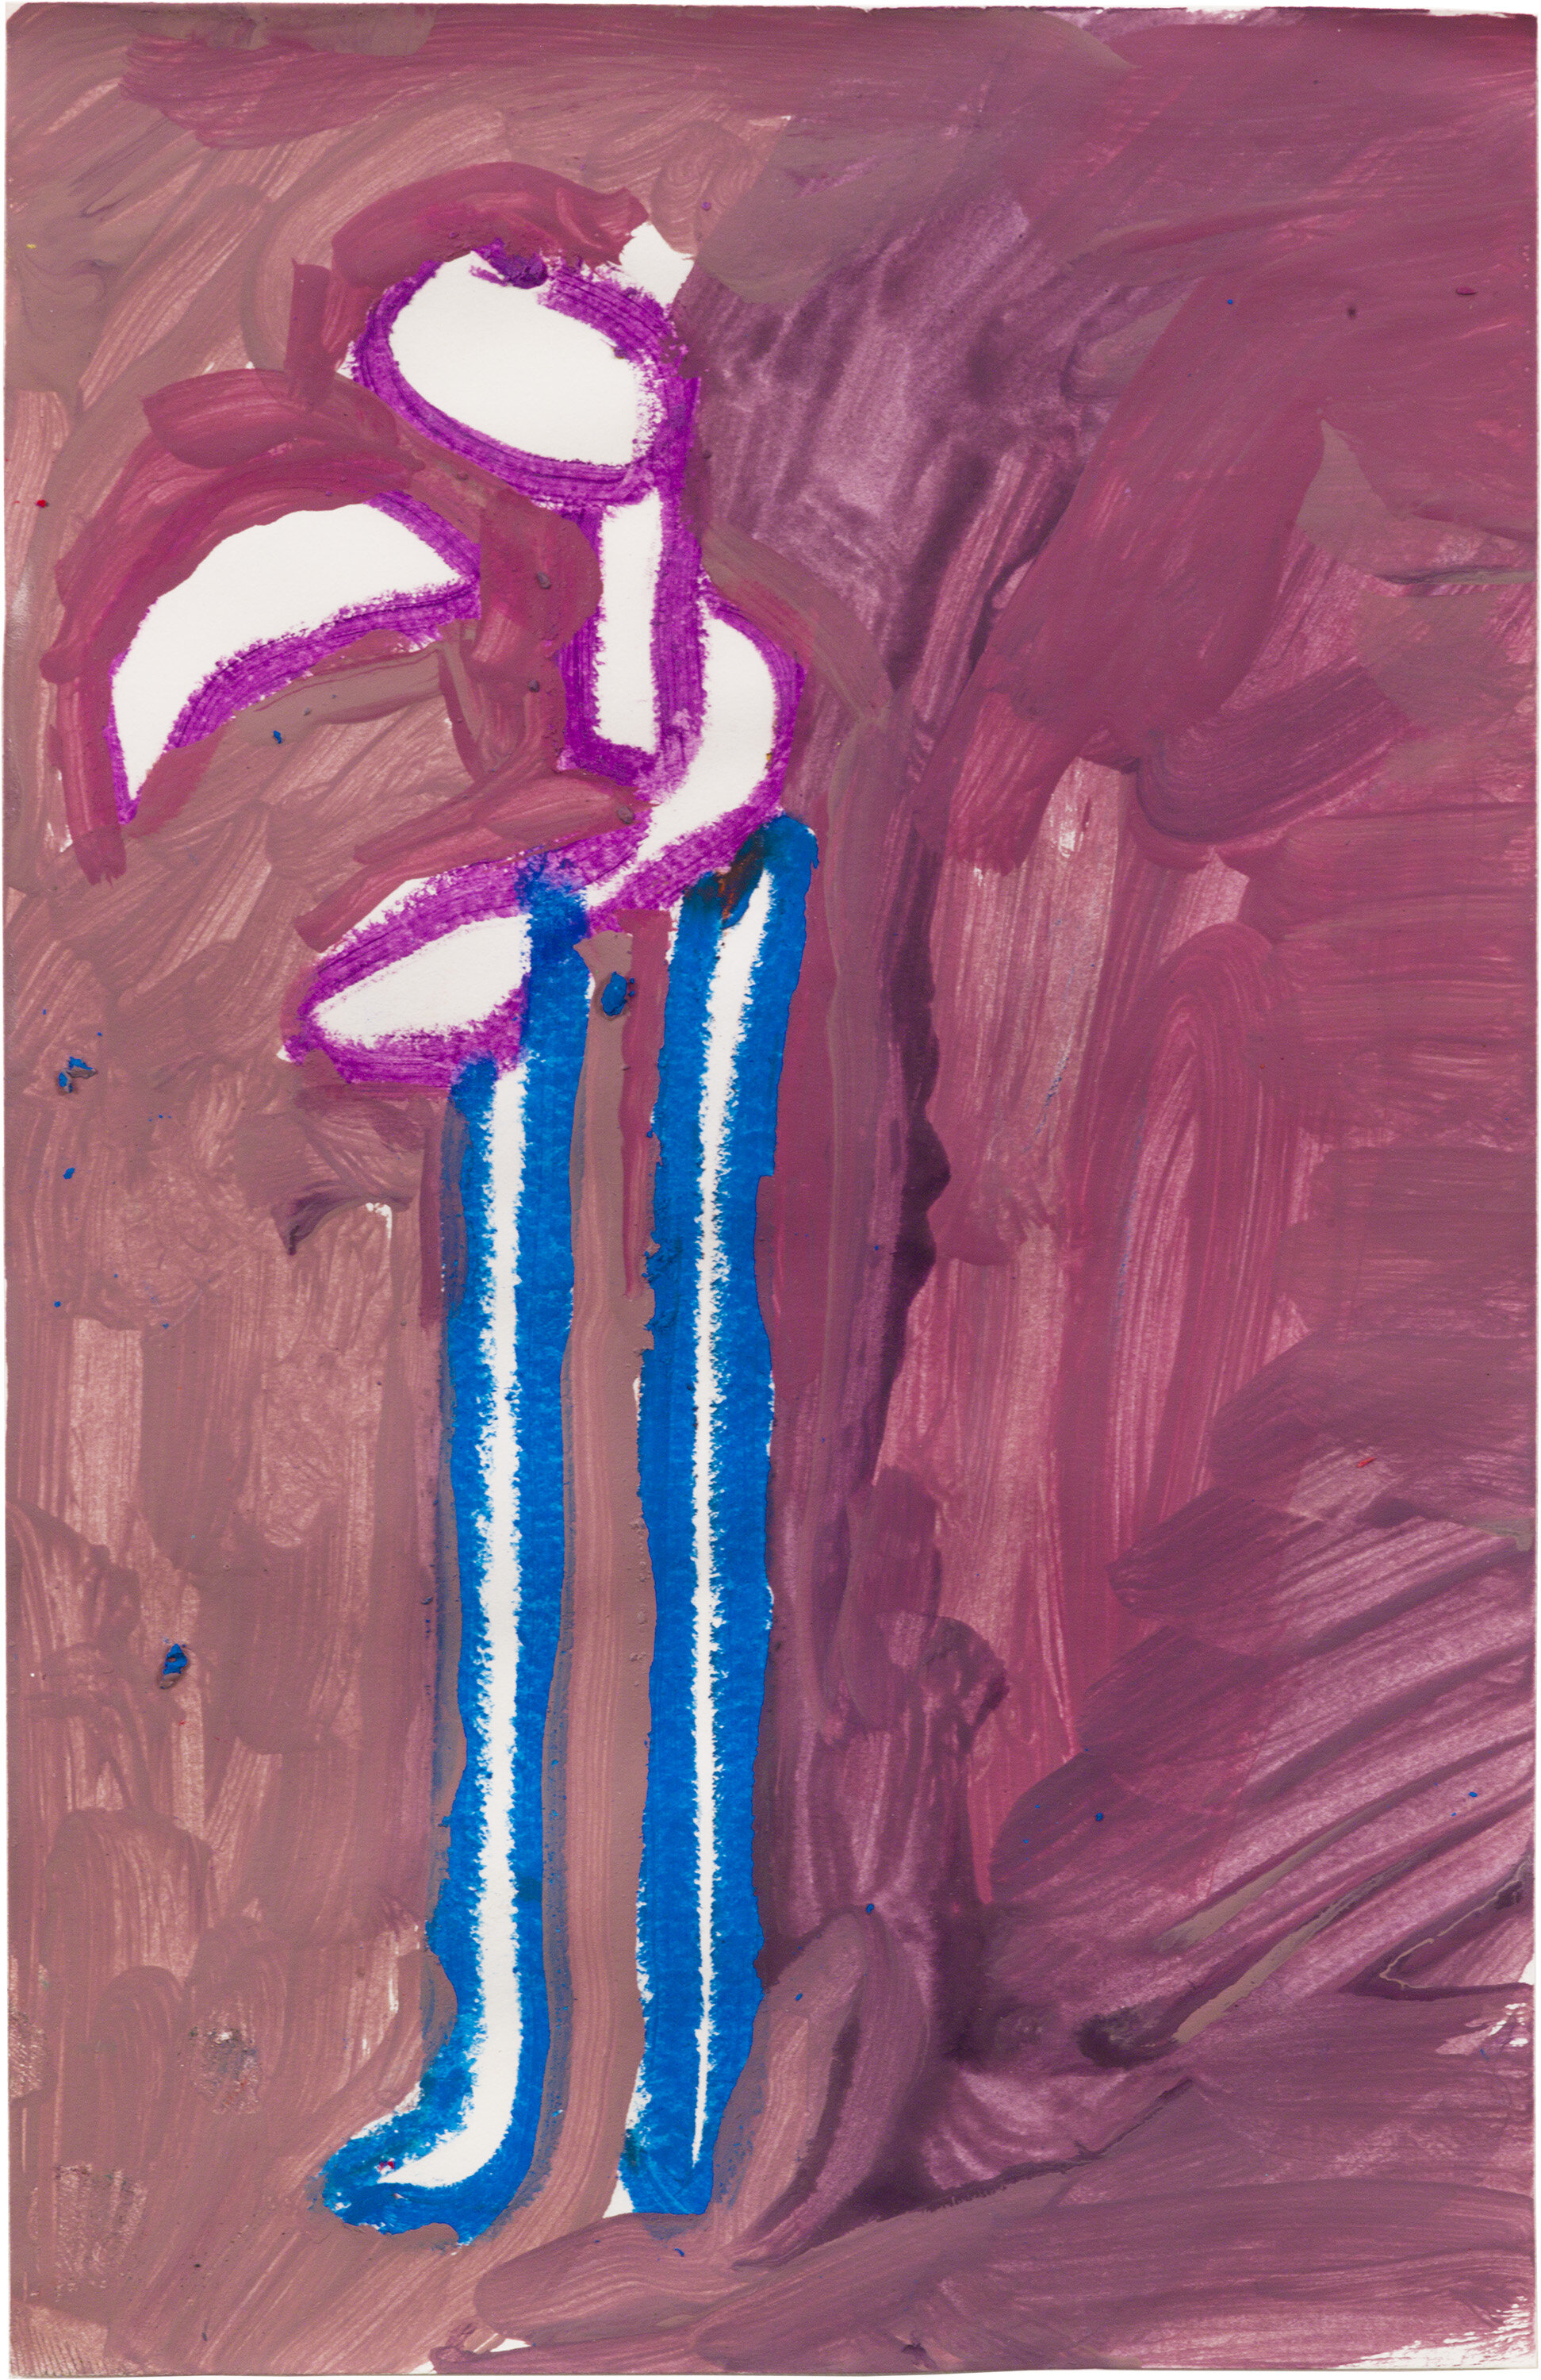  Drew Beattie and Ben Shepard   DBBS-DRW-2013-027   2013  acrylic and oil stick on paper  8.5 x 5.5 inches 